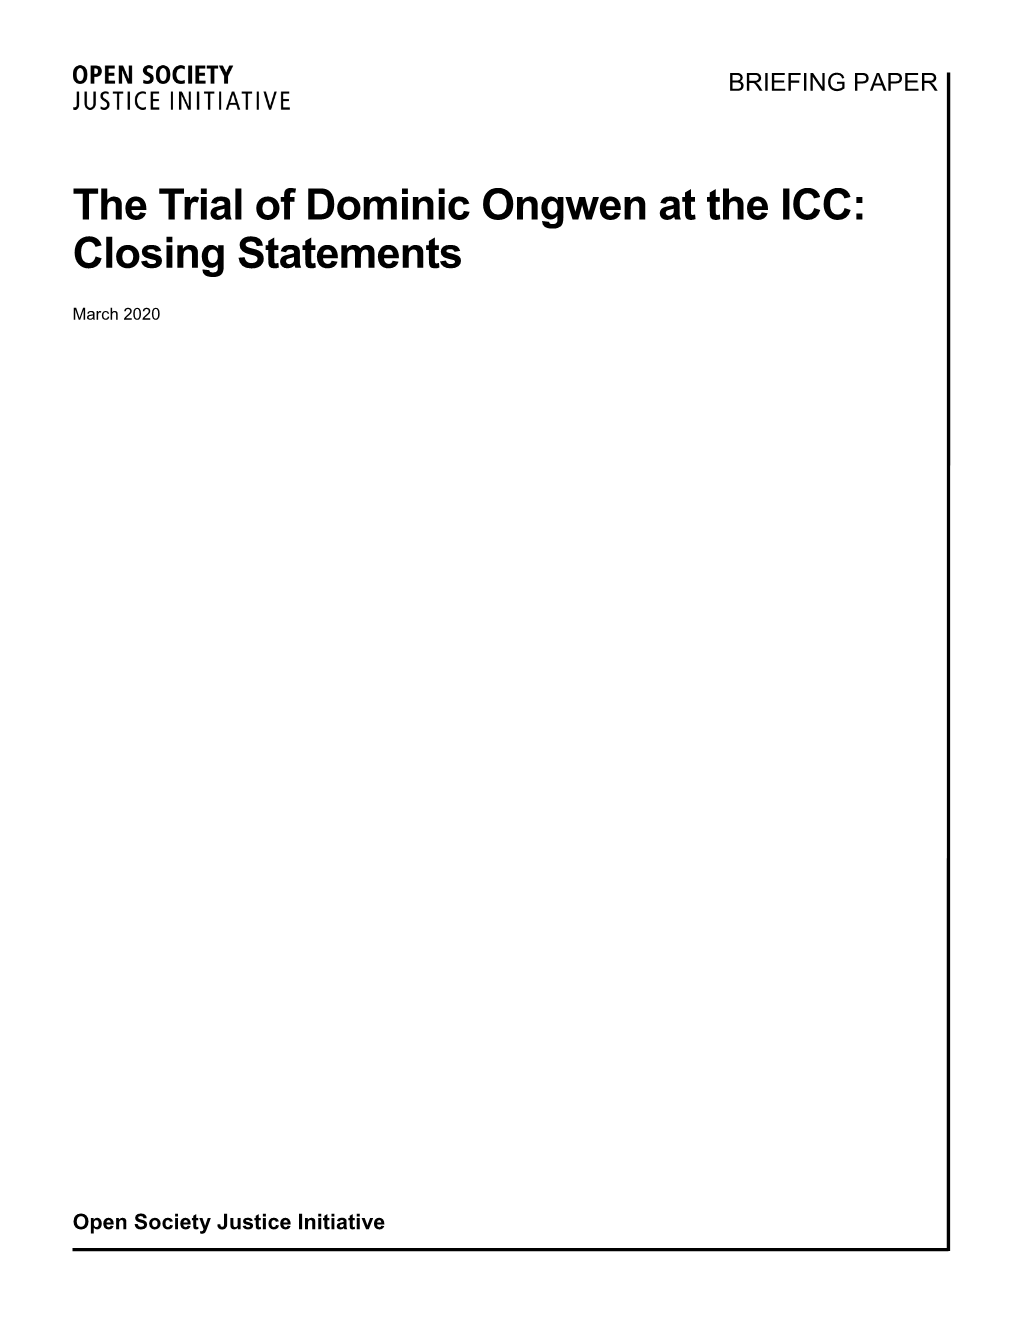 The Trial of Dominic Ongwen at the ICC: Closing Statements